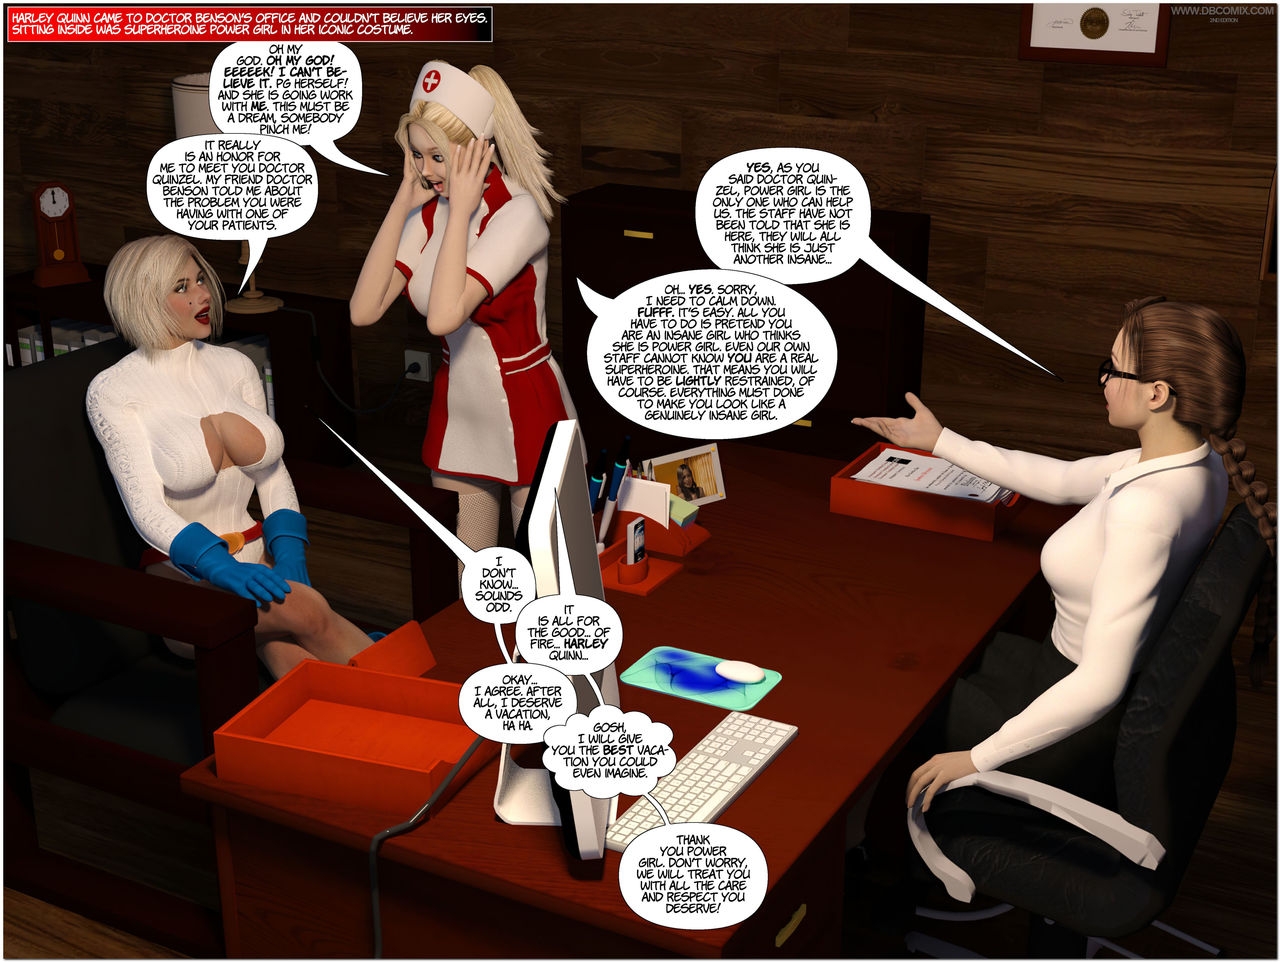 [DBComix] New Arkham For Superheroines 1 2nd Edition - Humiliation and Degradation of Power Girl 23